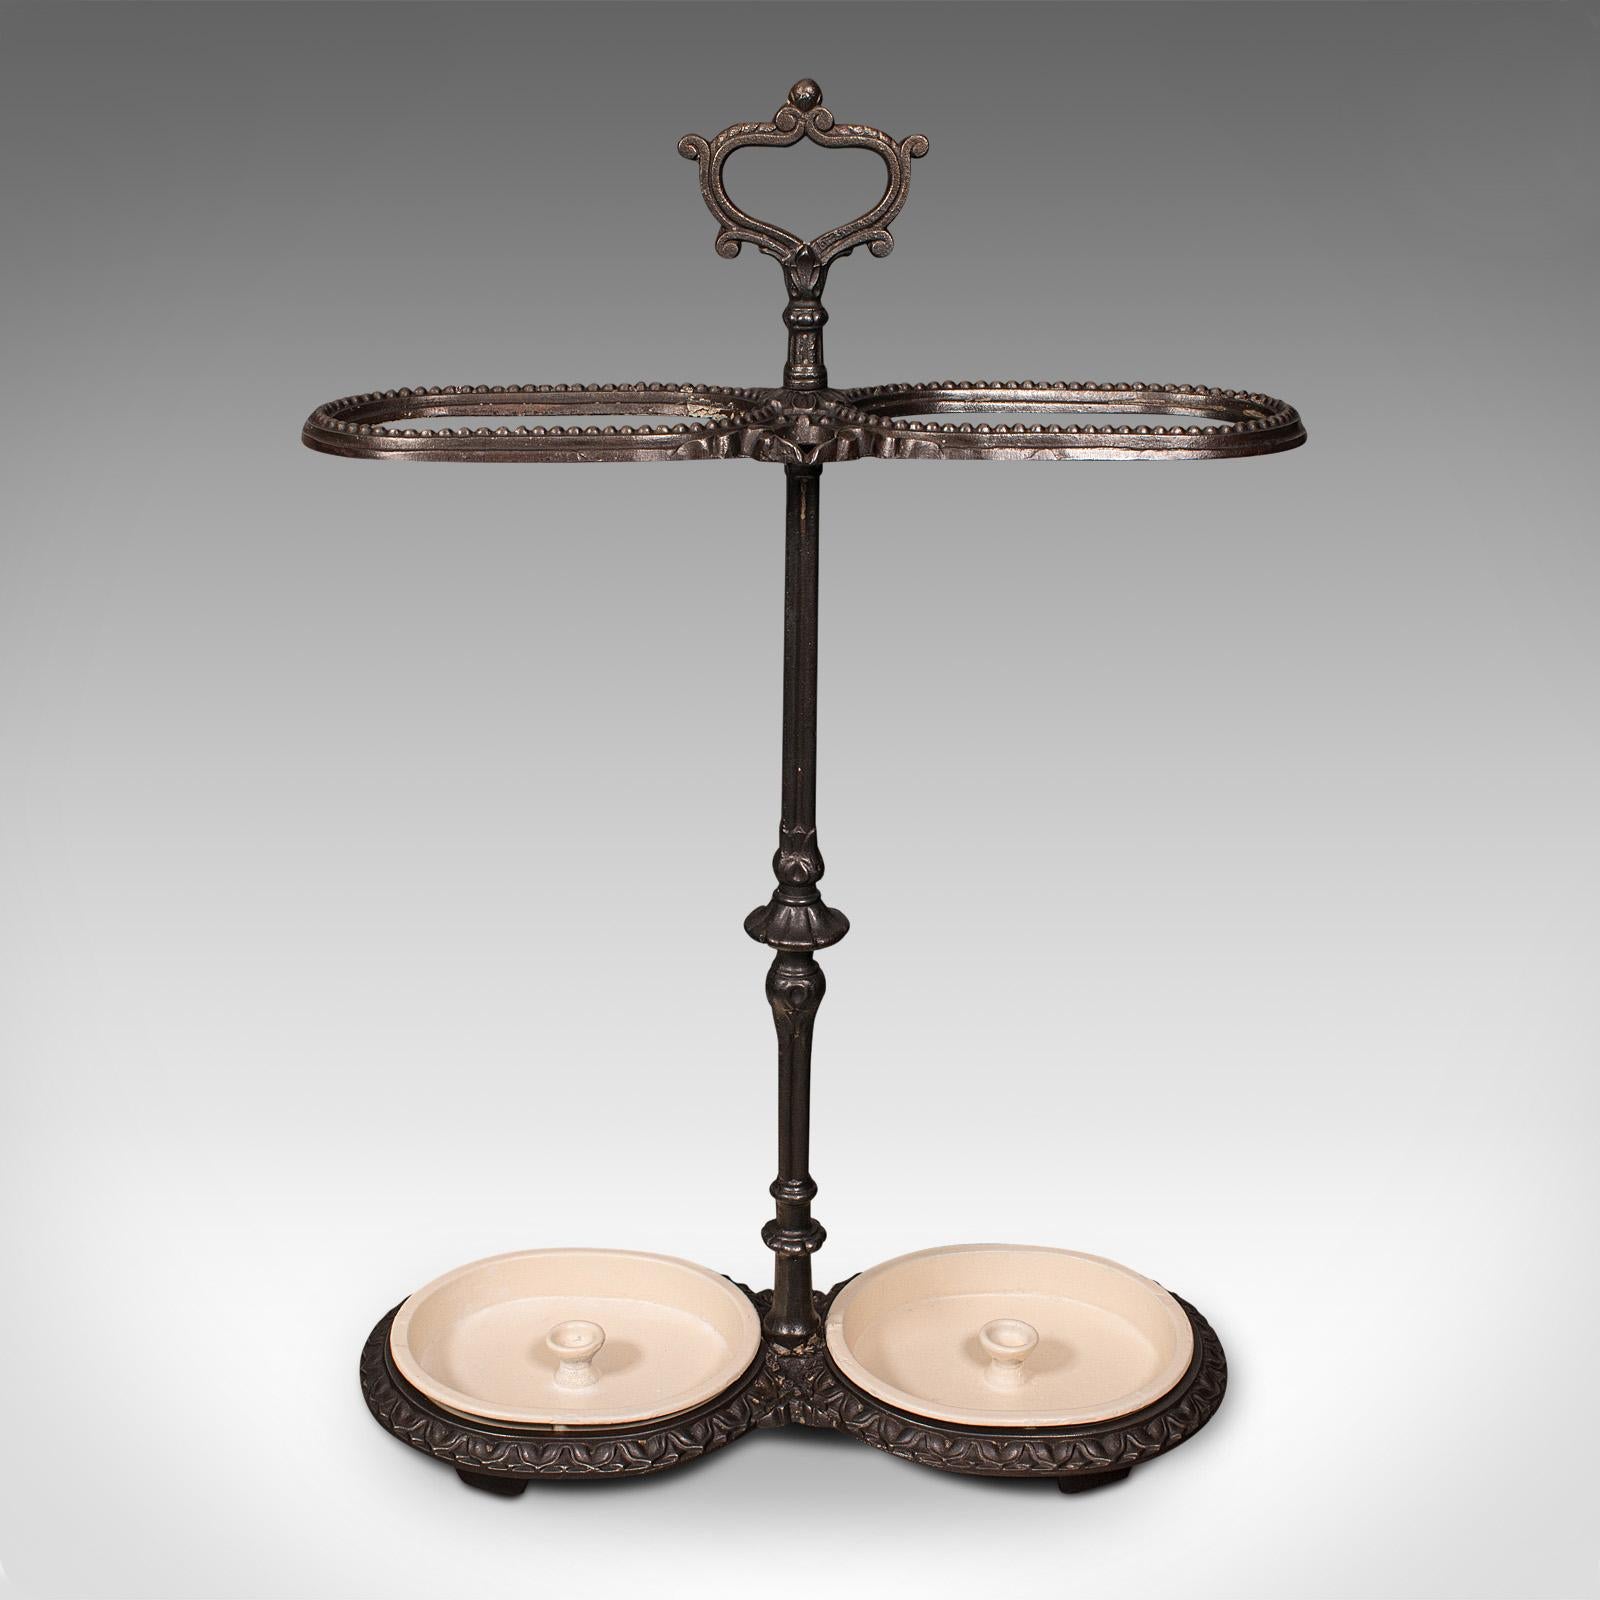 This is an antique decorative stick stand. A French, cast iron hallway umbrella rack with Art Nouveau taste, dating to the late Victorian period, circa 1900.

Distinctive form and delightful detail abound
Displaying a desirable aged patina and in